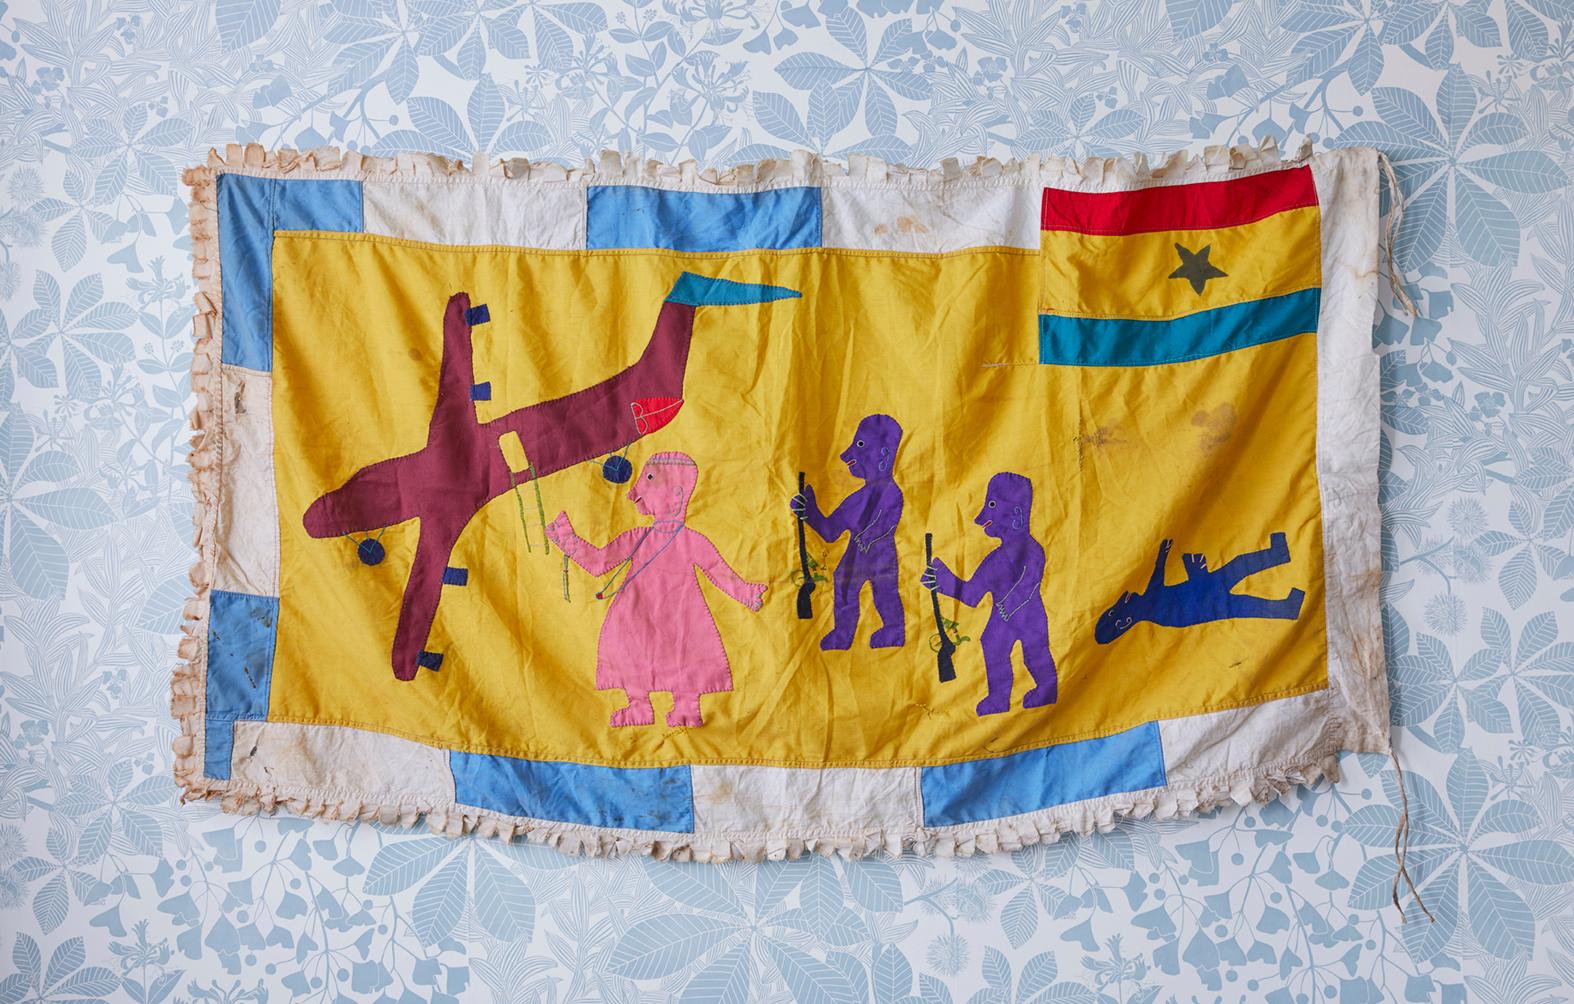 Asafo flag in cotton applique patters. Fante People.

Asafo flags are created by the Fante people of Ghana. The flags are visual representations of military organisations in Fante communities known as “Asafo”. The communities each have their own